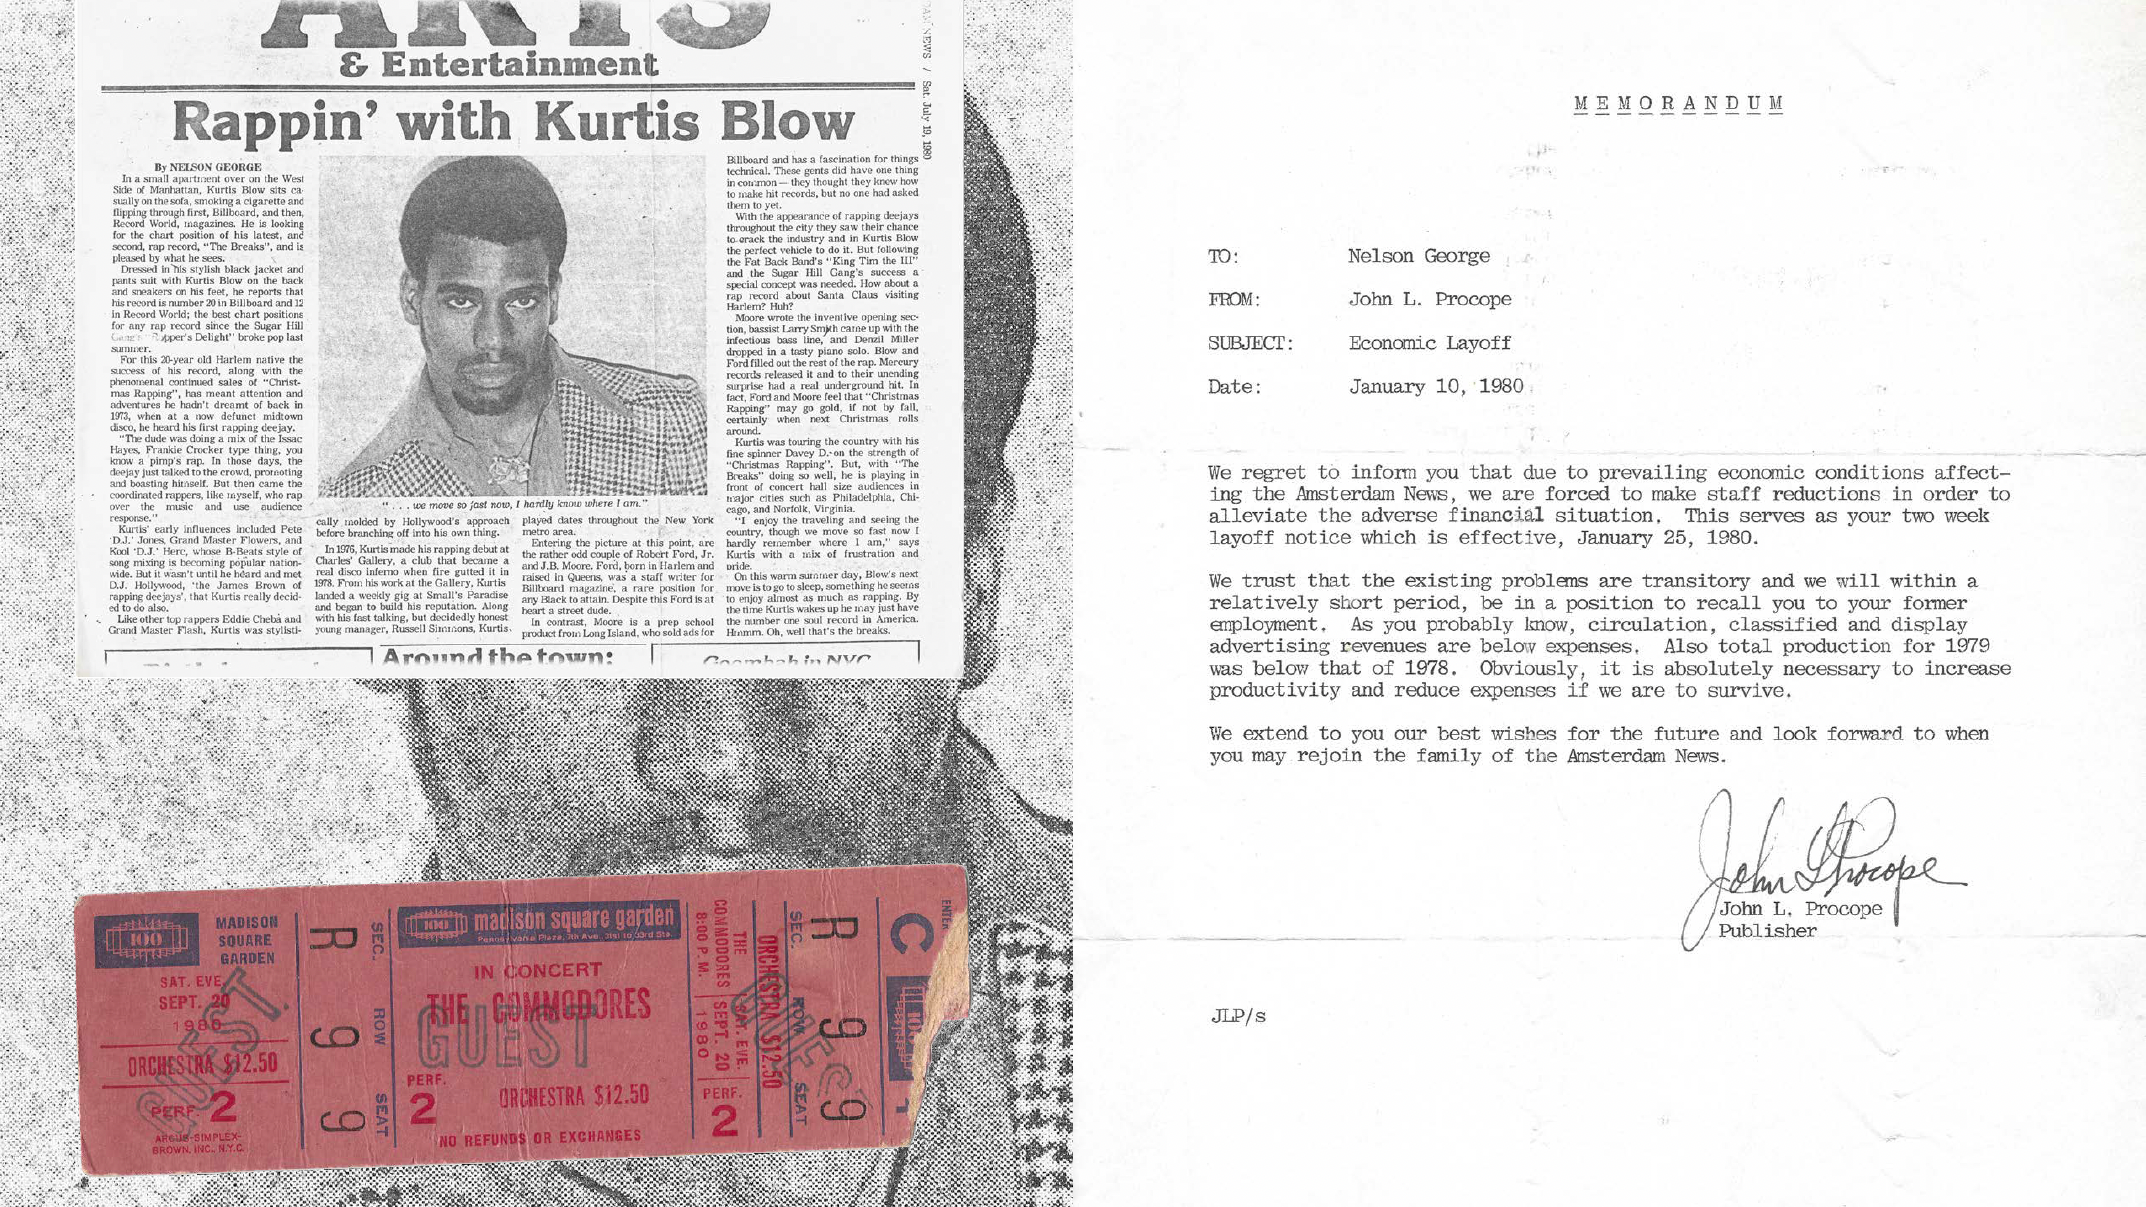 Left side of the image is a collage of a newspaper clipping and concert ticket, laid over a portrait. The right side of the image is a letter typewritten letter and signed in the bottom right corner. 